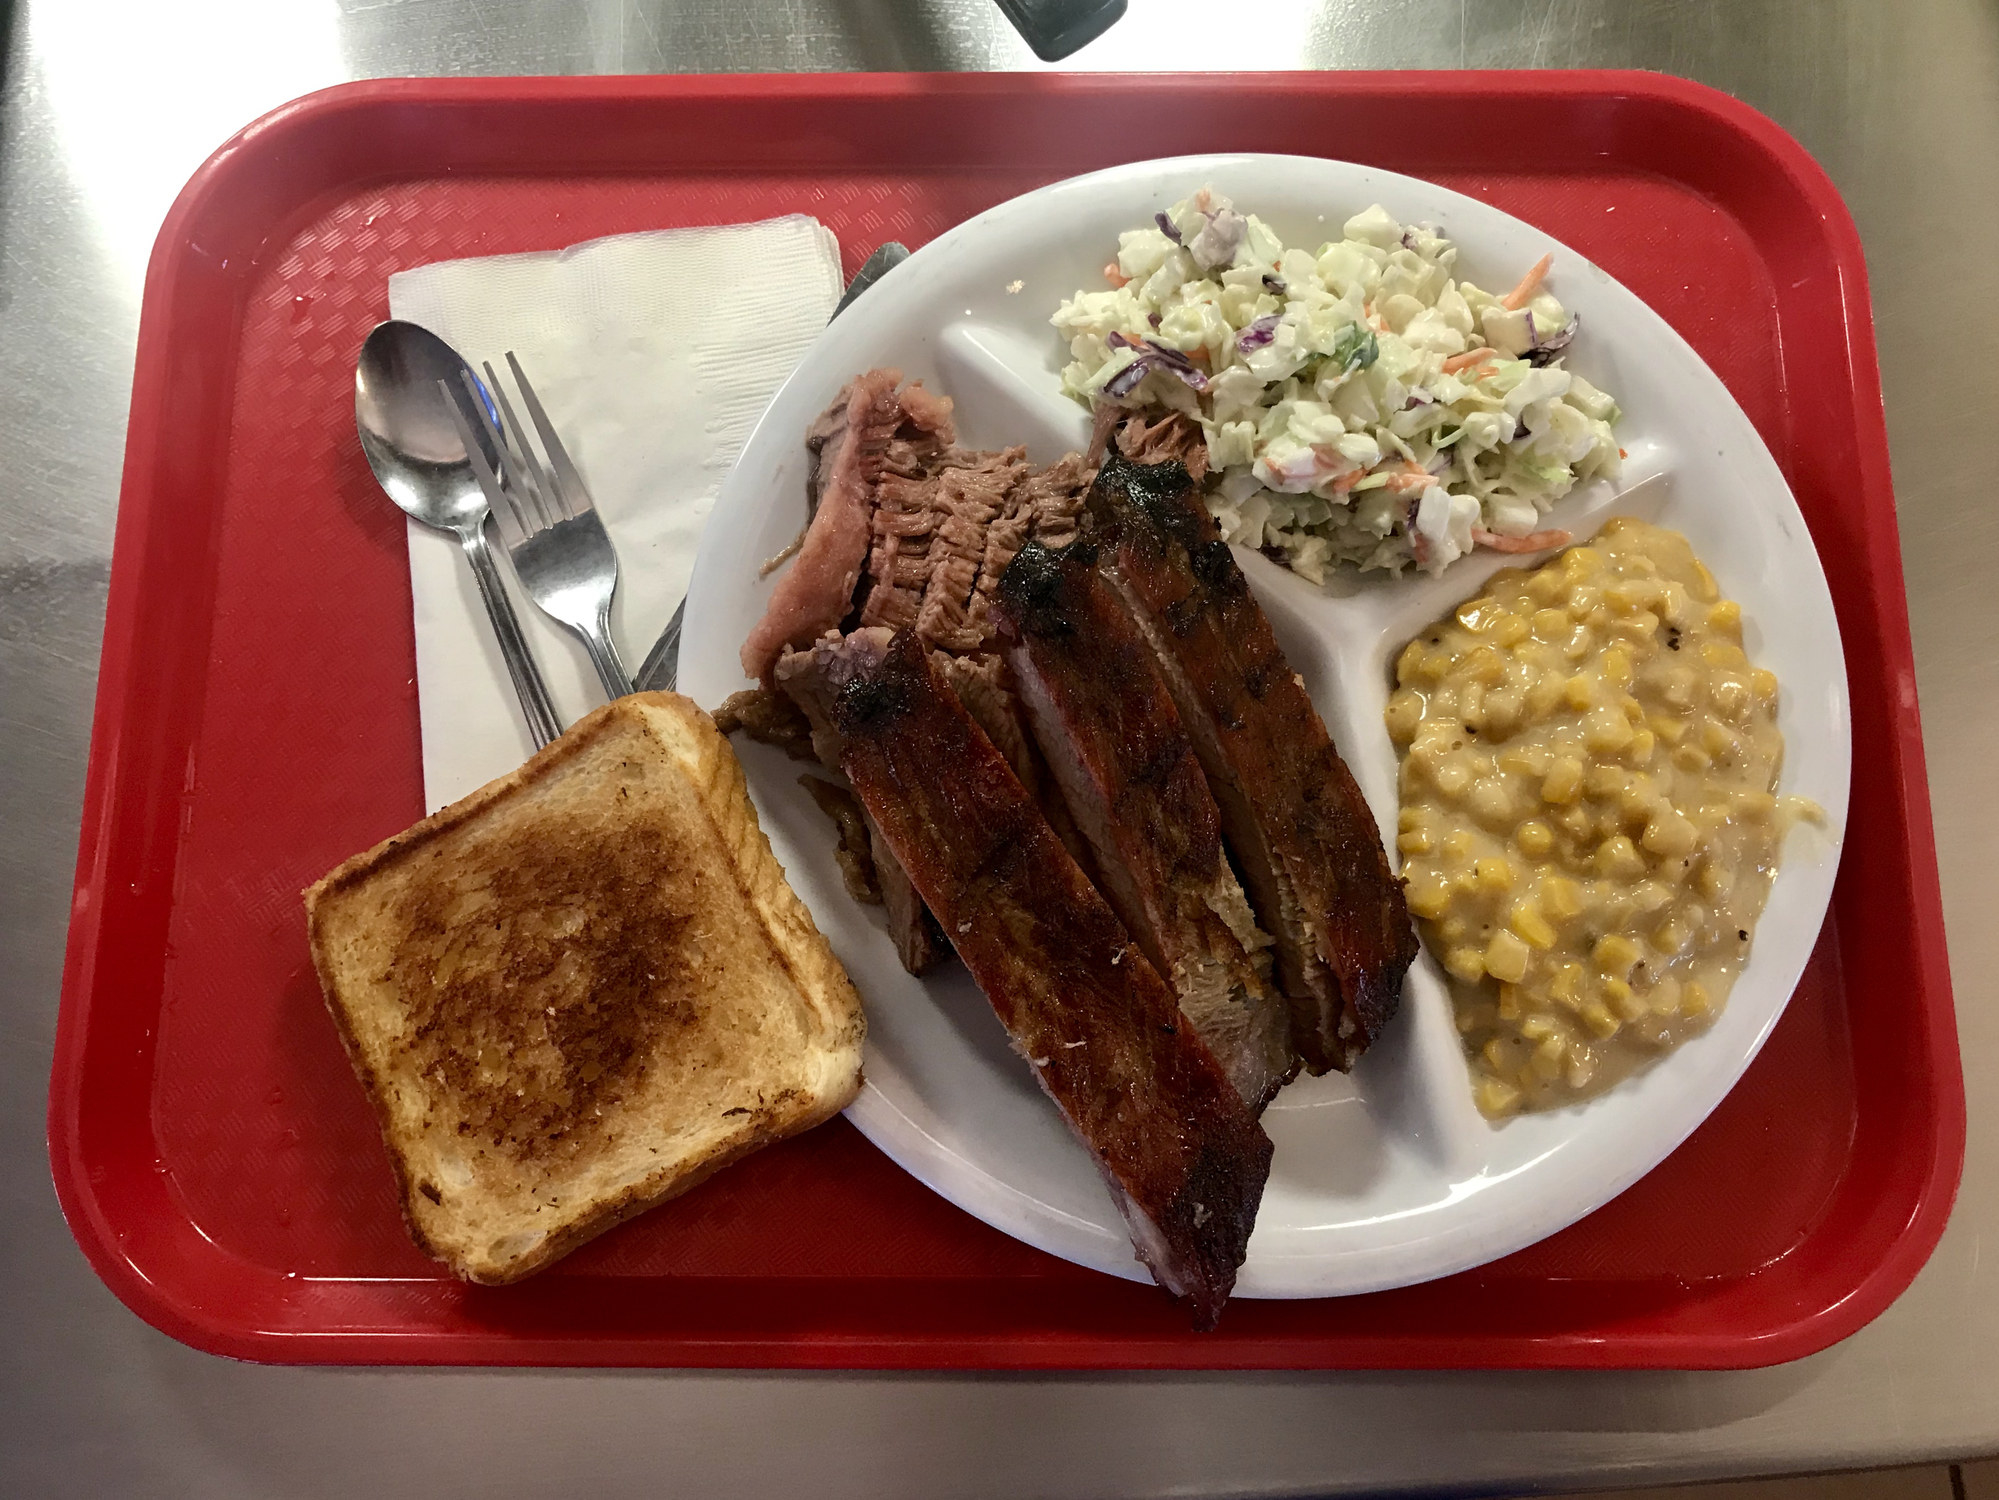 A plate of Texas barbecue food.